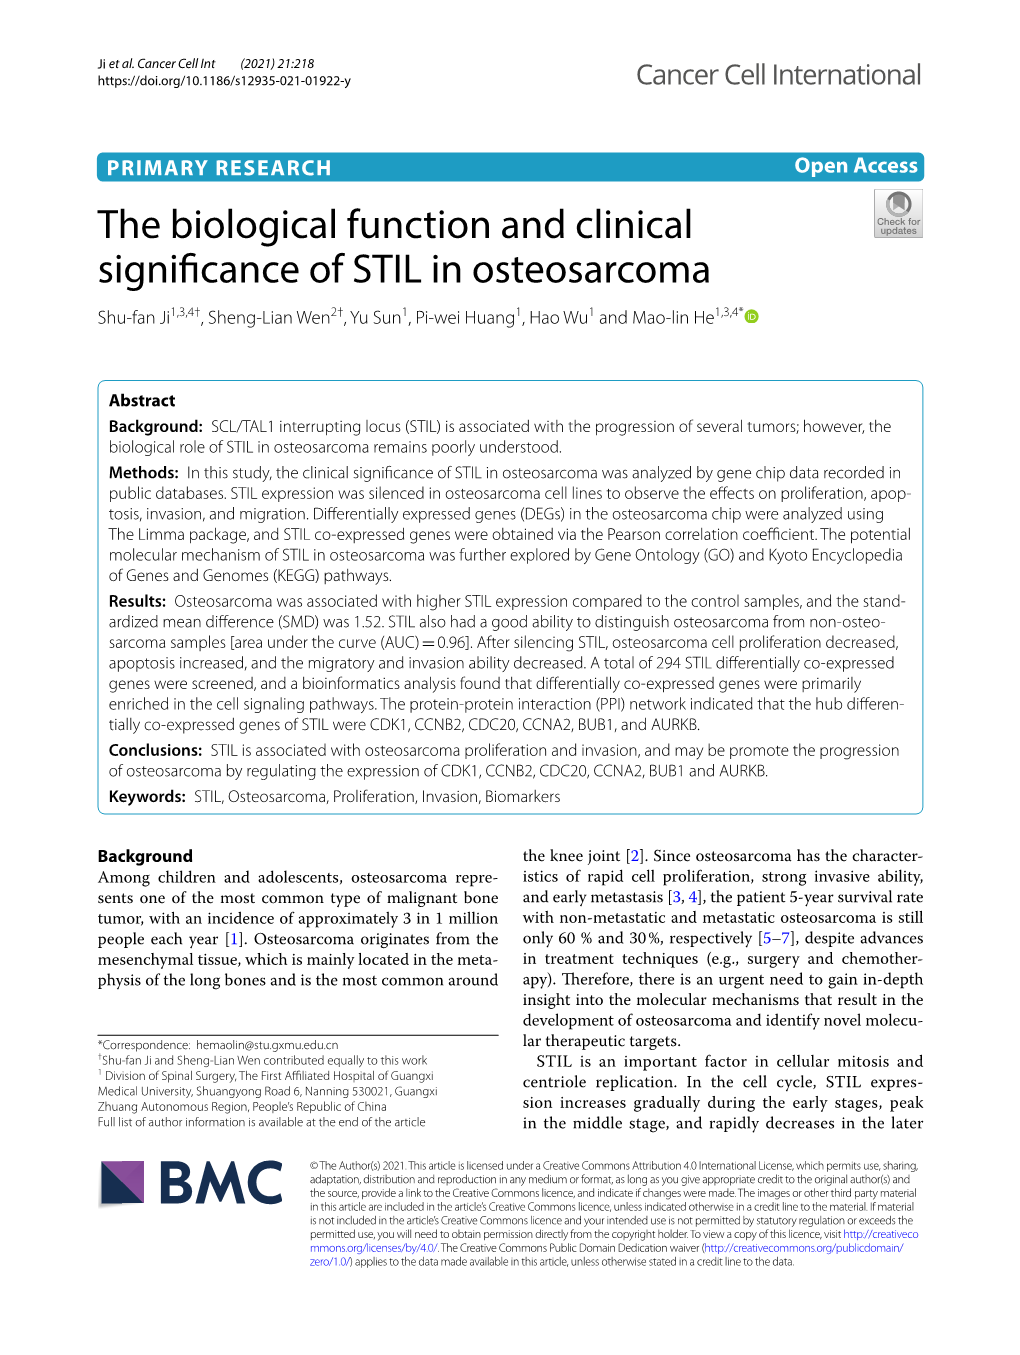 The Biological Function and Clinical Significance of STIL in Osteosarcoma